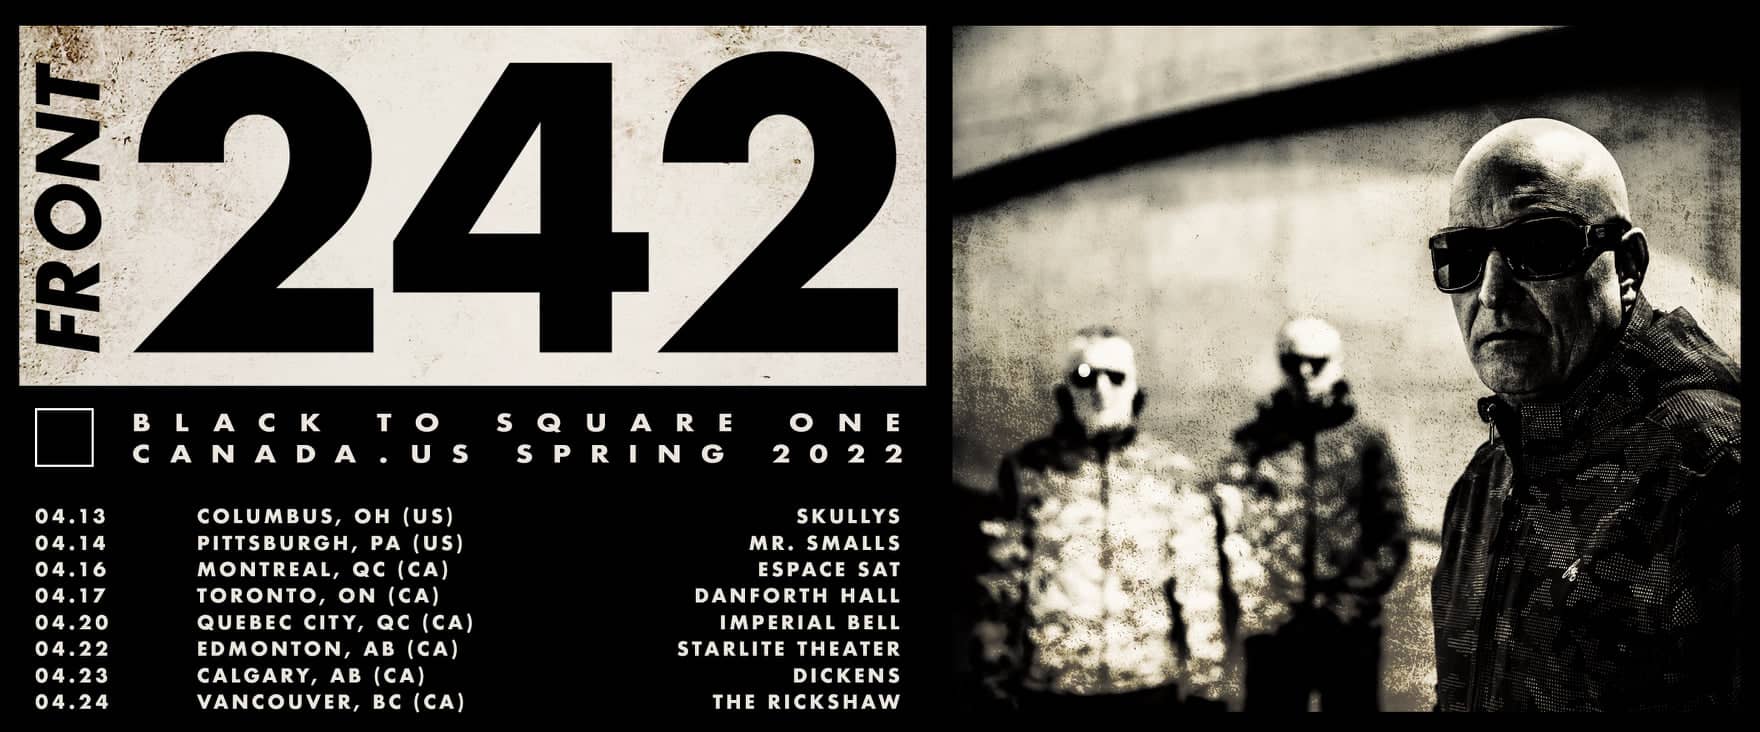 FRONT 242 - BLACK TO SQUARE ONE CANADA + US SPRING 2022